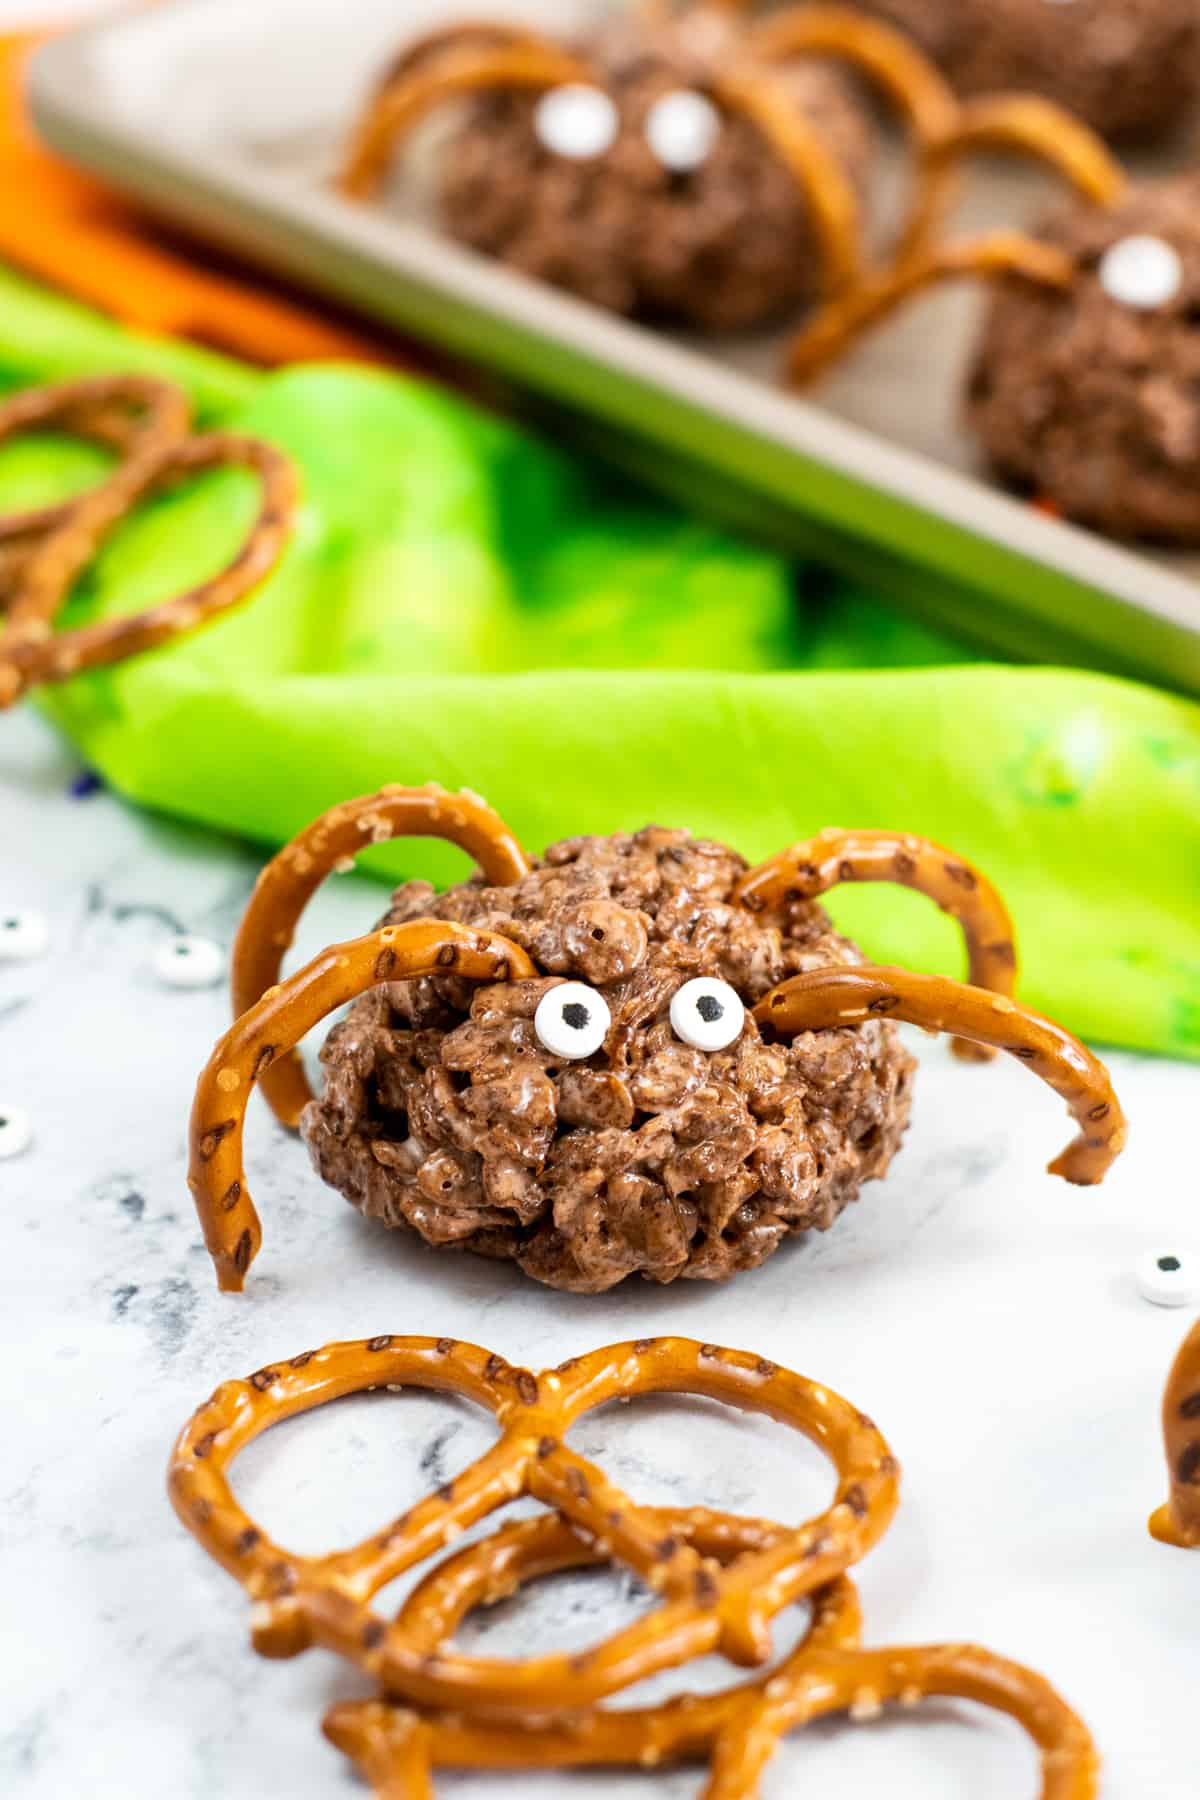 Brown rice krispies treat spiders with pretzel pieces as legs and candy eyes